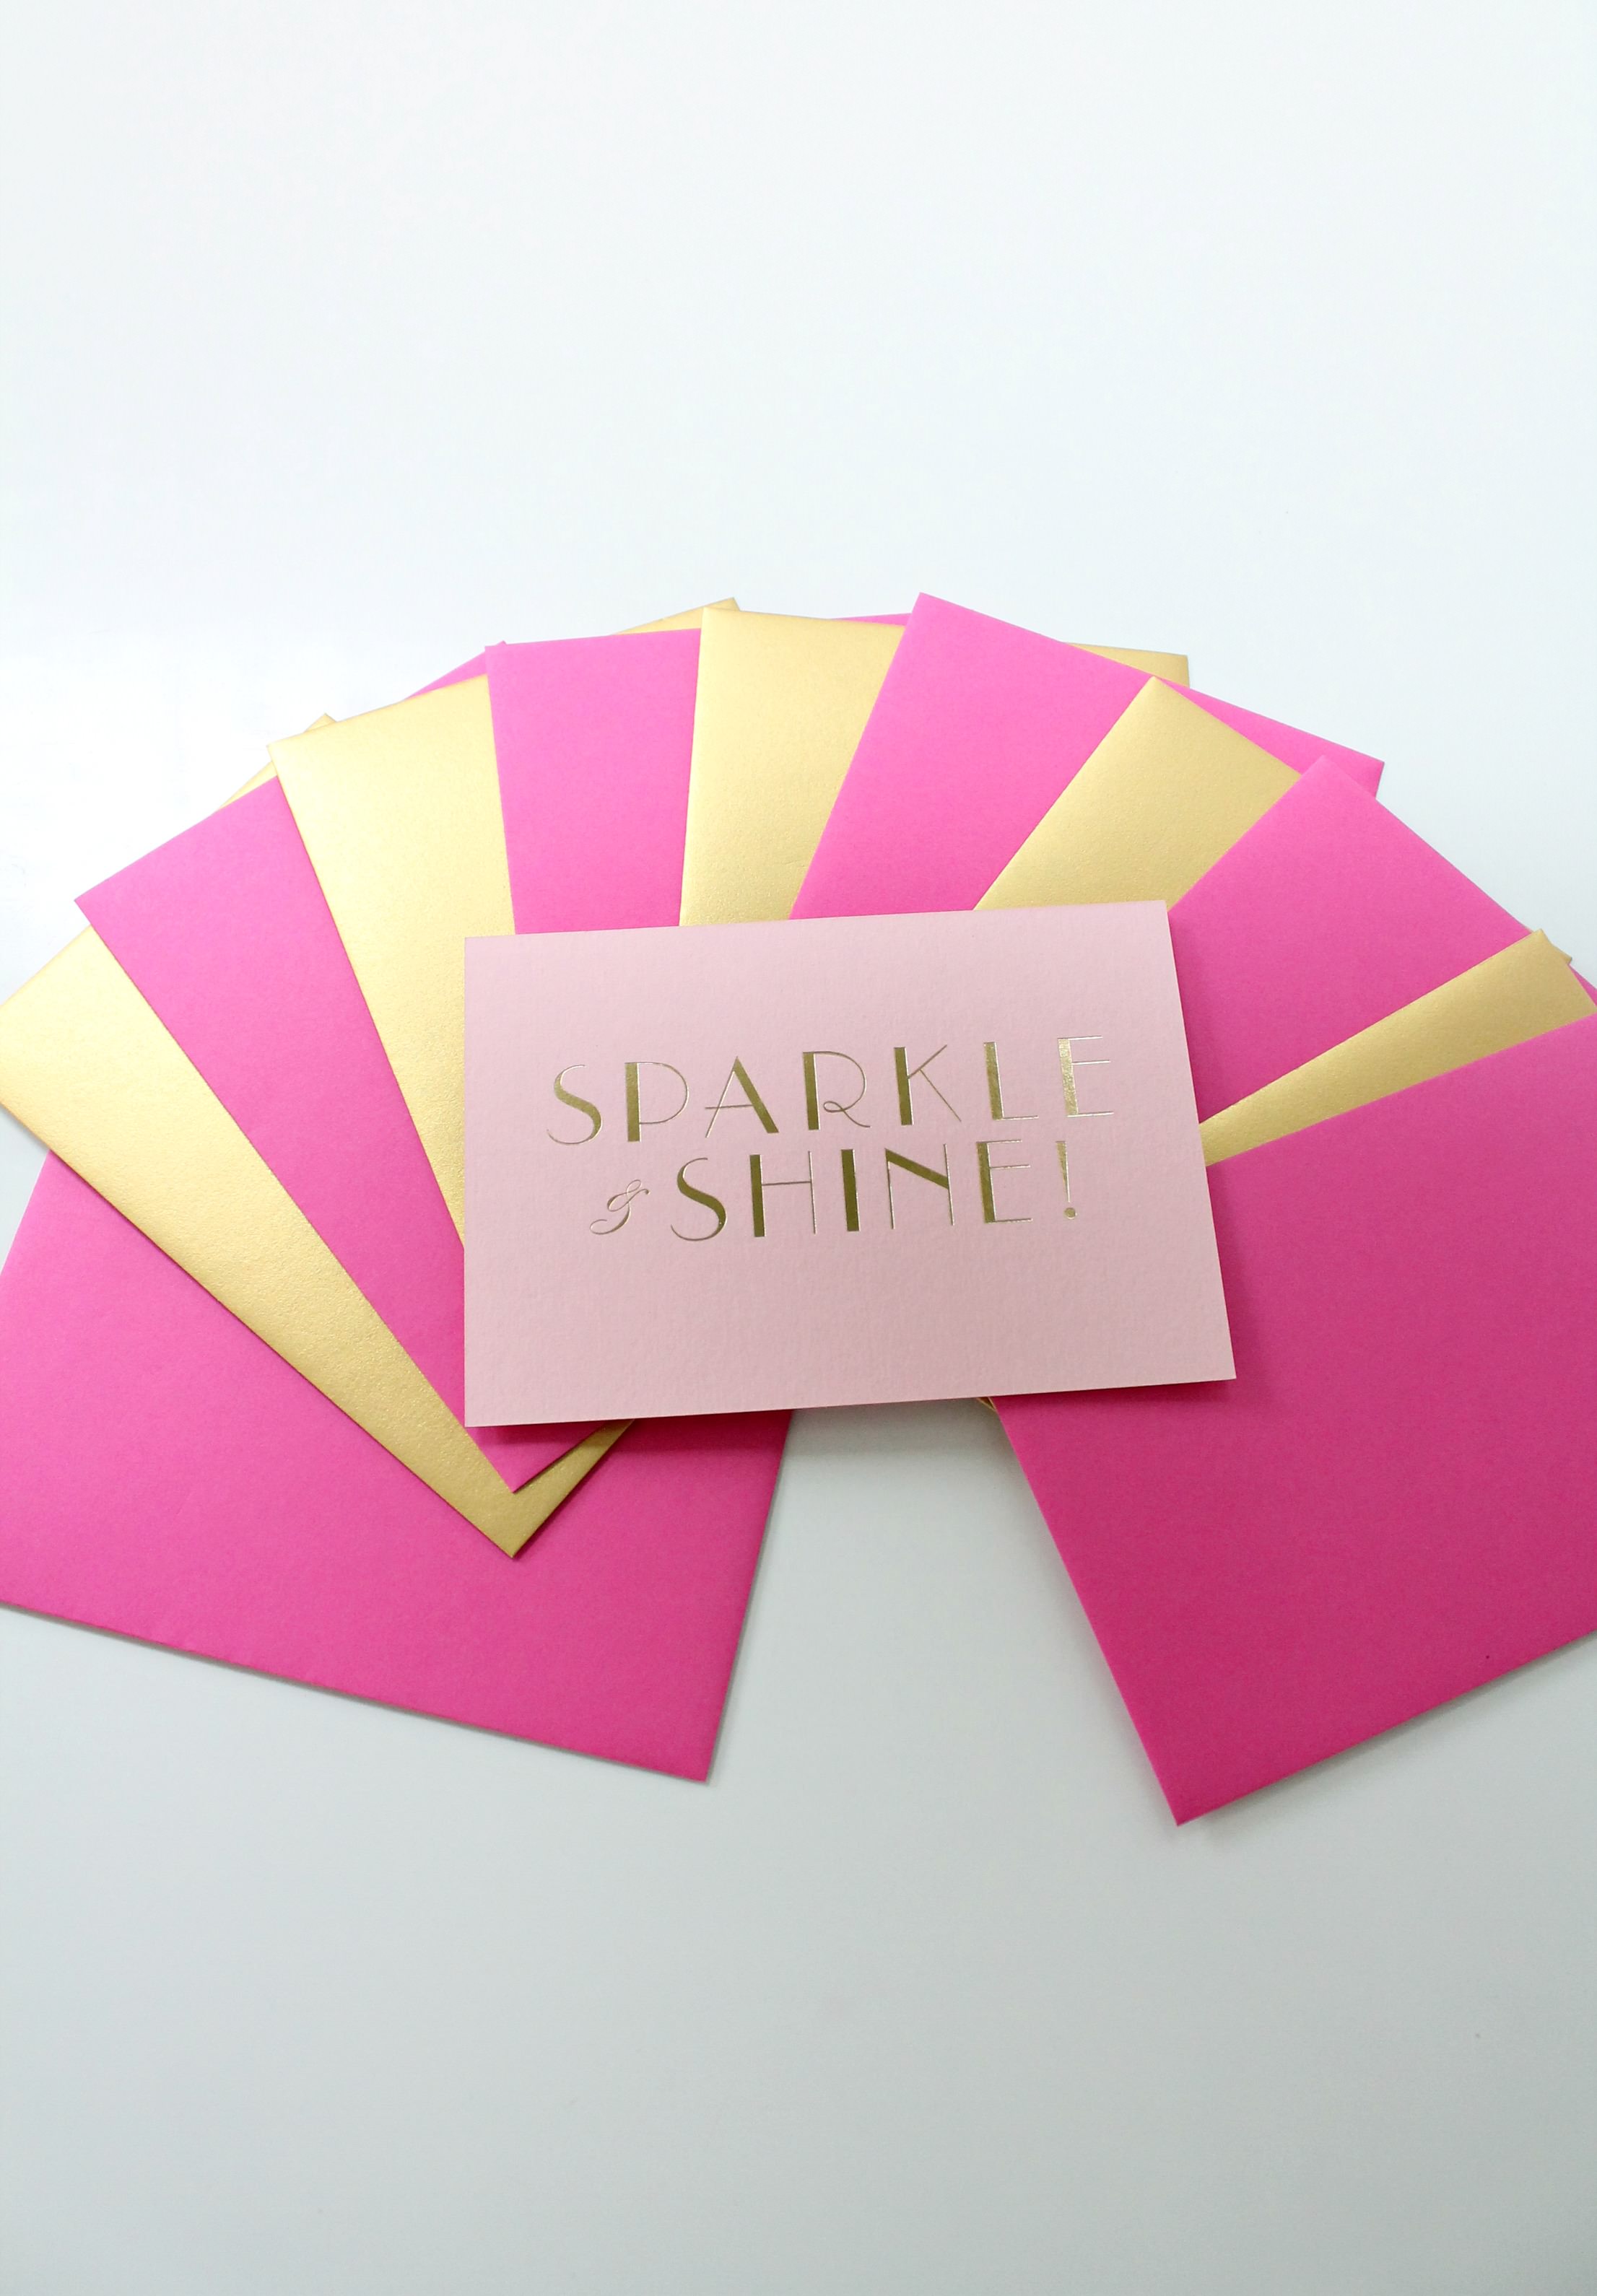 Alt-Summit-2015-SLC-business-cards-Sparkle-and-shine-for-Little-Big-Bell